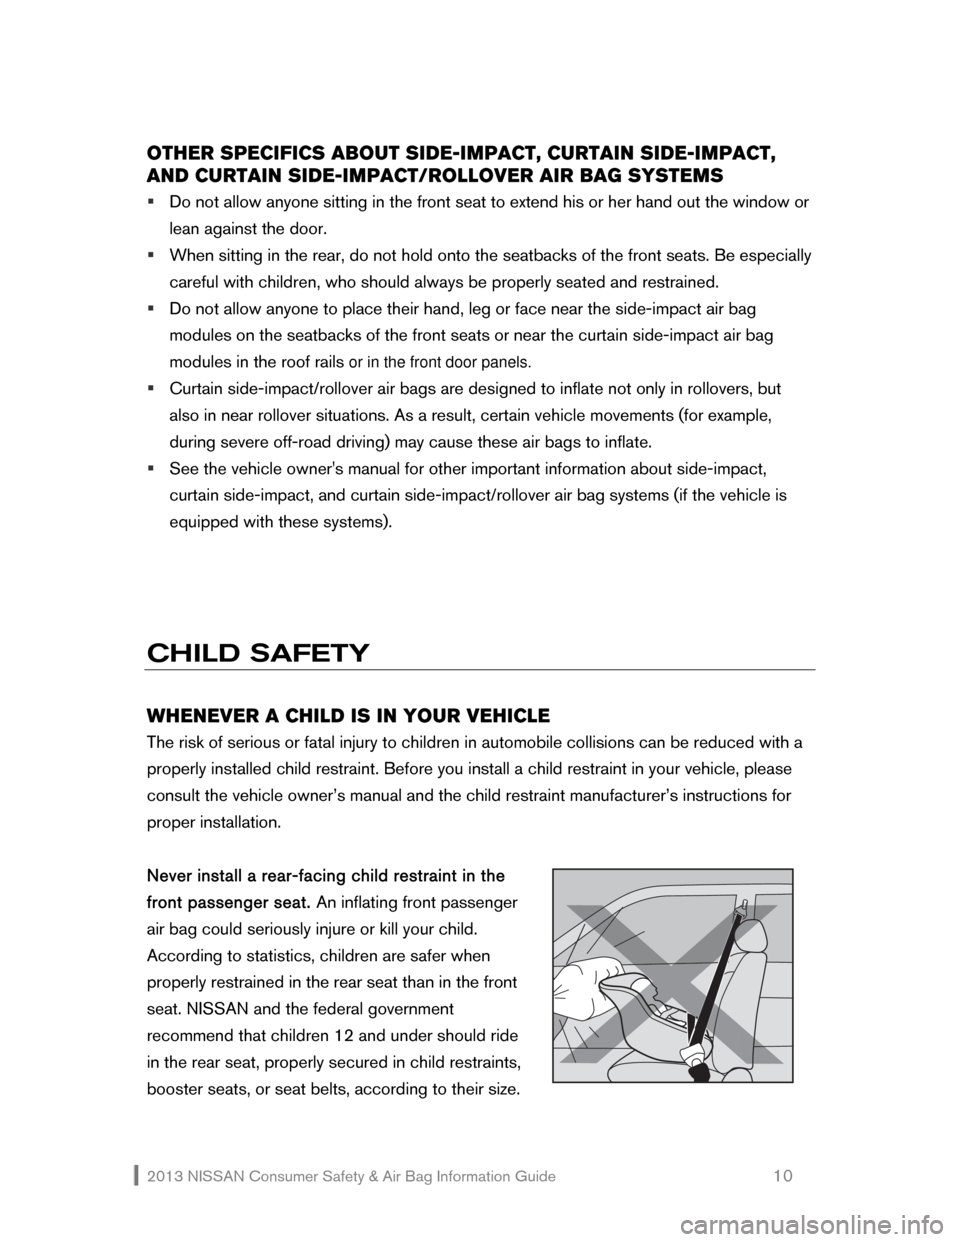 NISSAN MURANO 2013 2.G Consumer Safety Air Bag Information Guide 2013 NISSAN Consumer Safety & Air Bag Information Guide                                                   10 
OTHER SPECIFICS ABOUT SIDE-IMPACT, CURTAIN SIDE-IMPACT, 
AND CURTAIN SIDE-IMPACT/ROLLOVER 